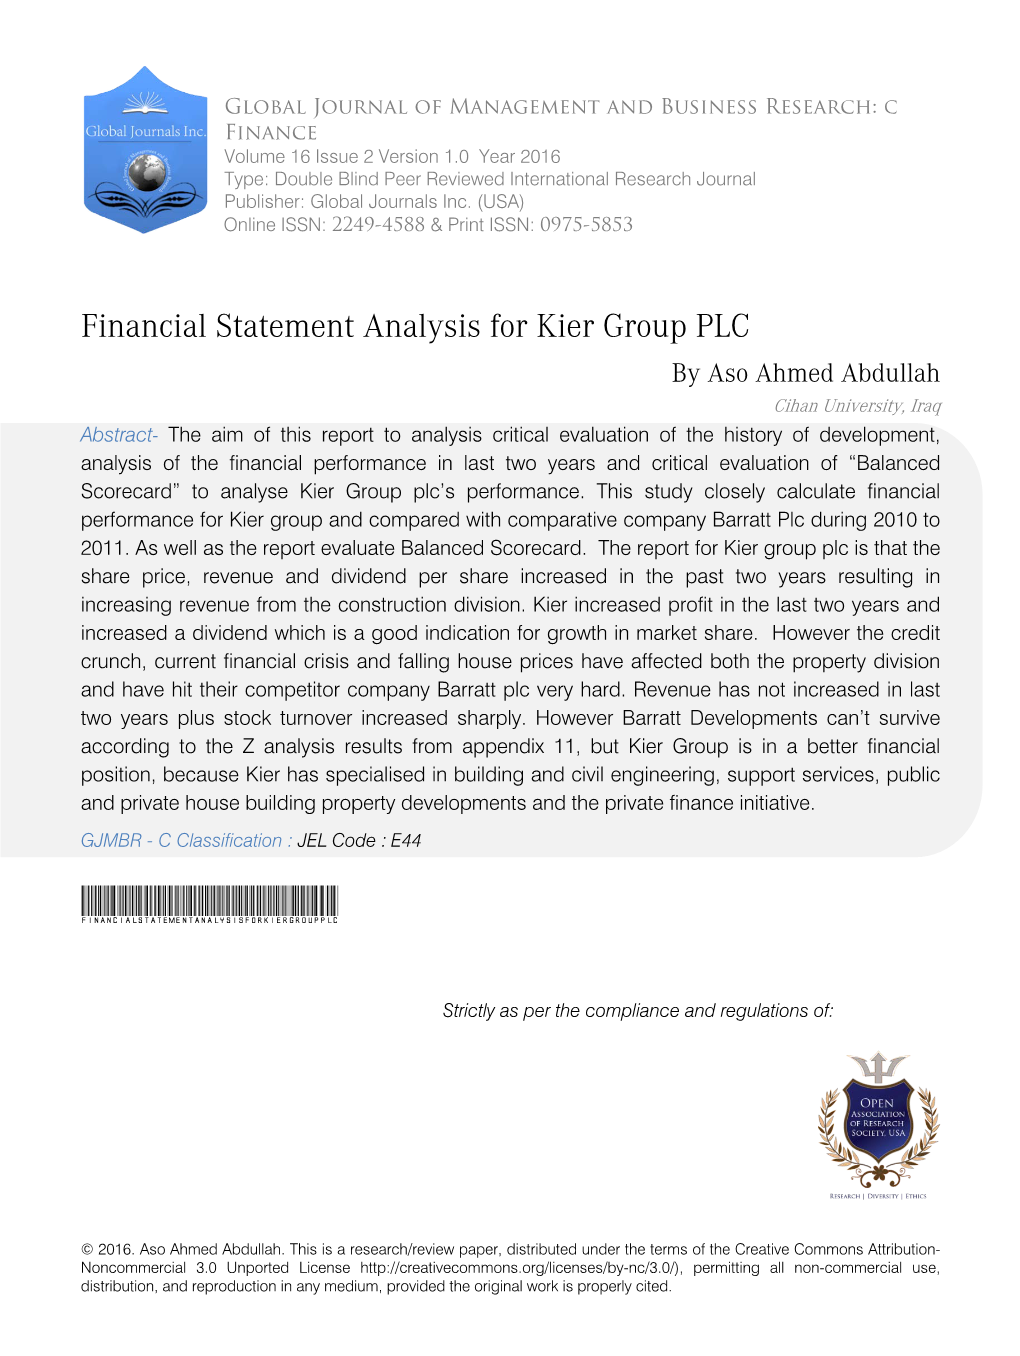 Financial Statement Analysis for Kier Group